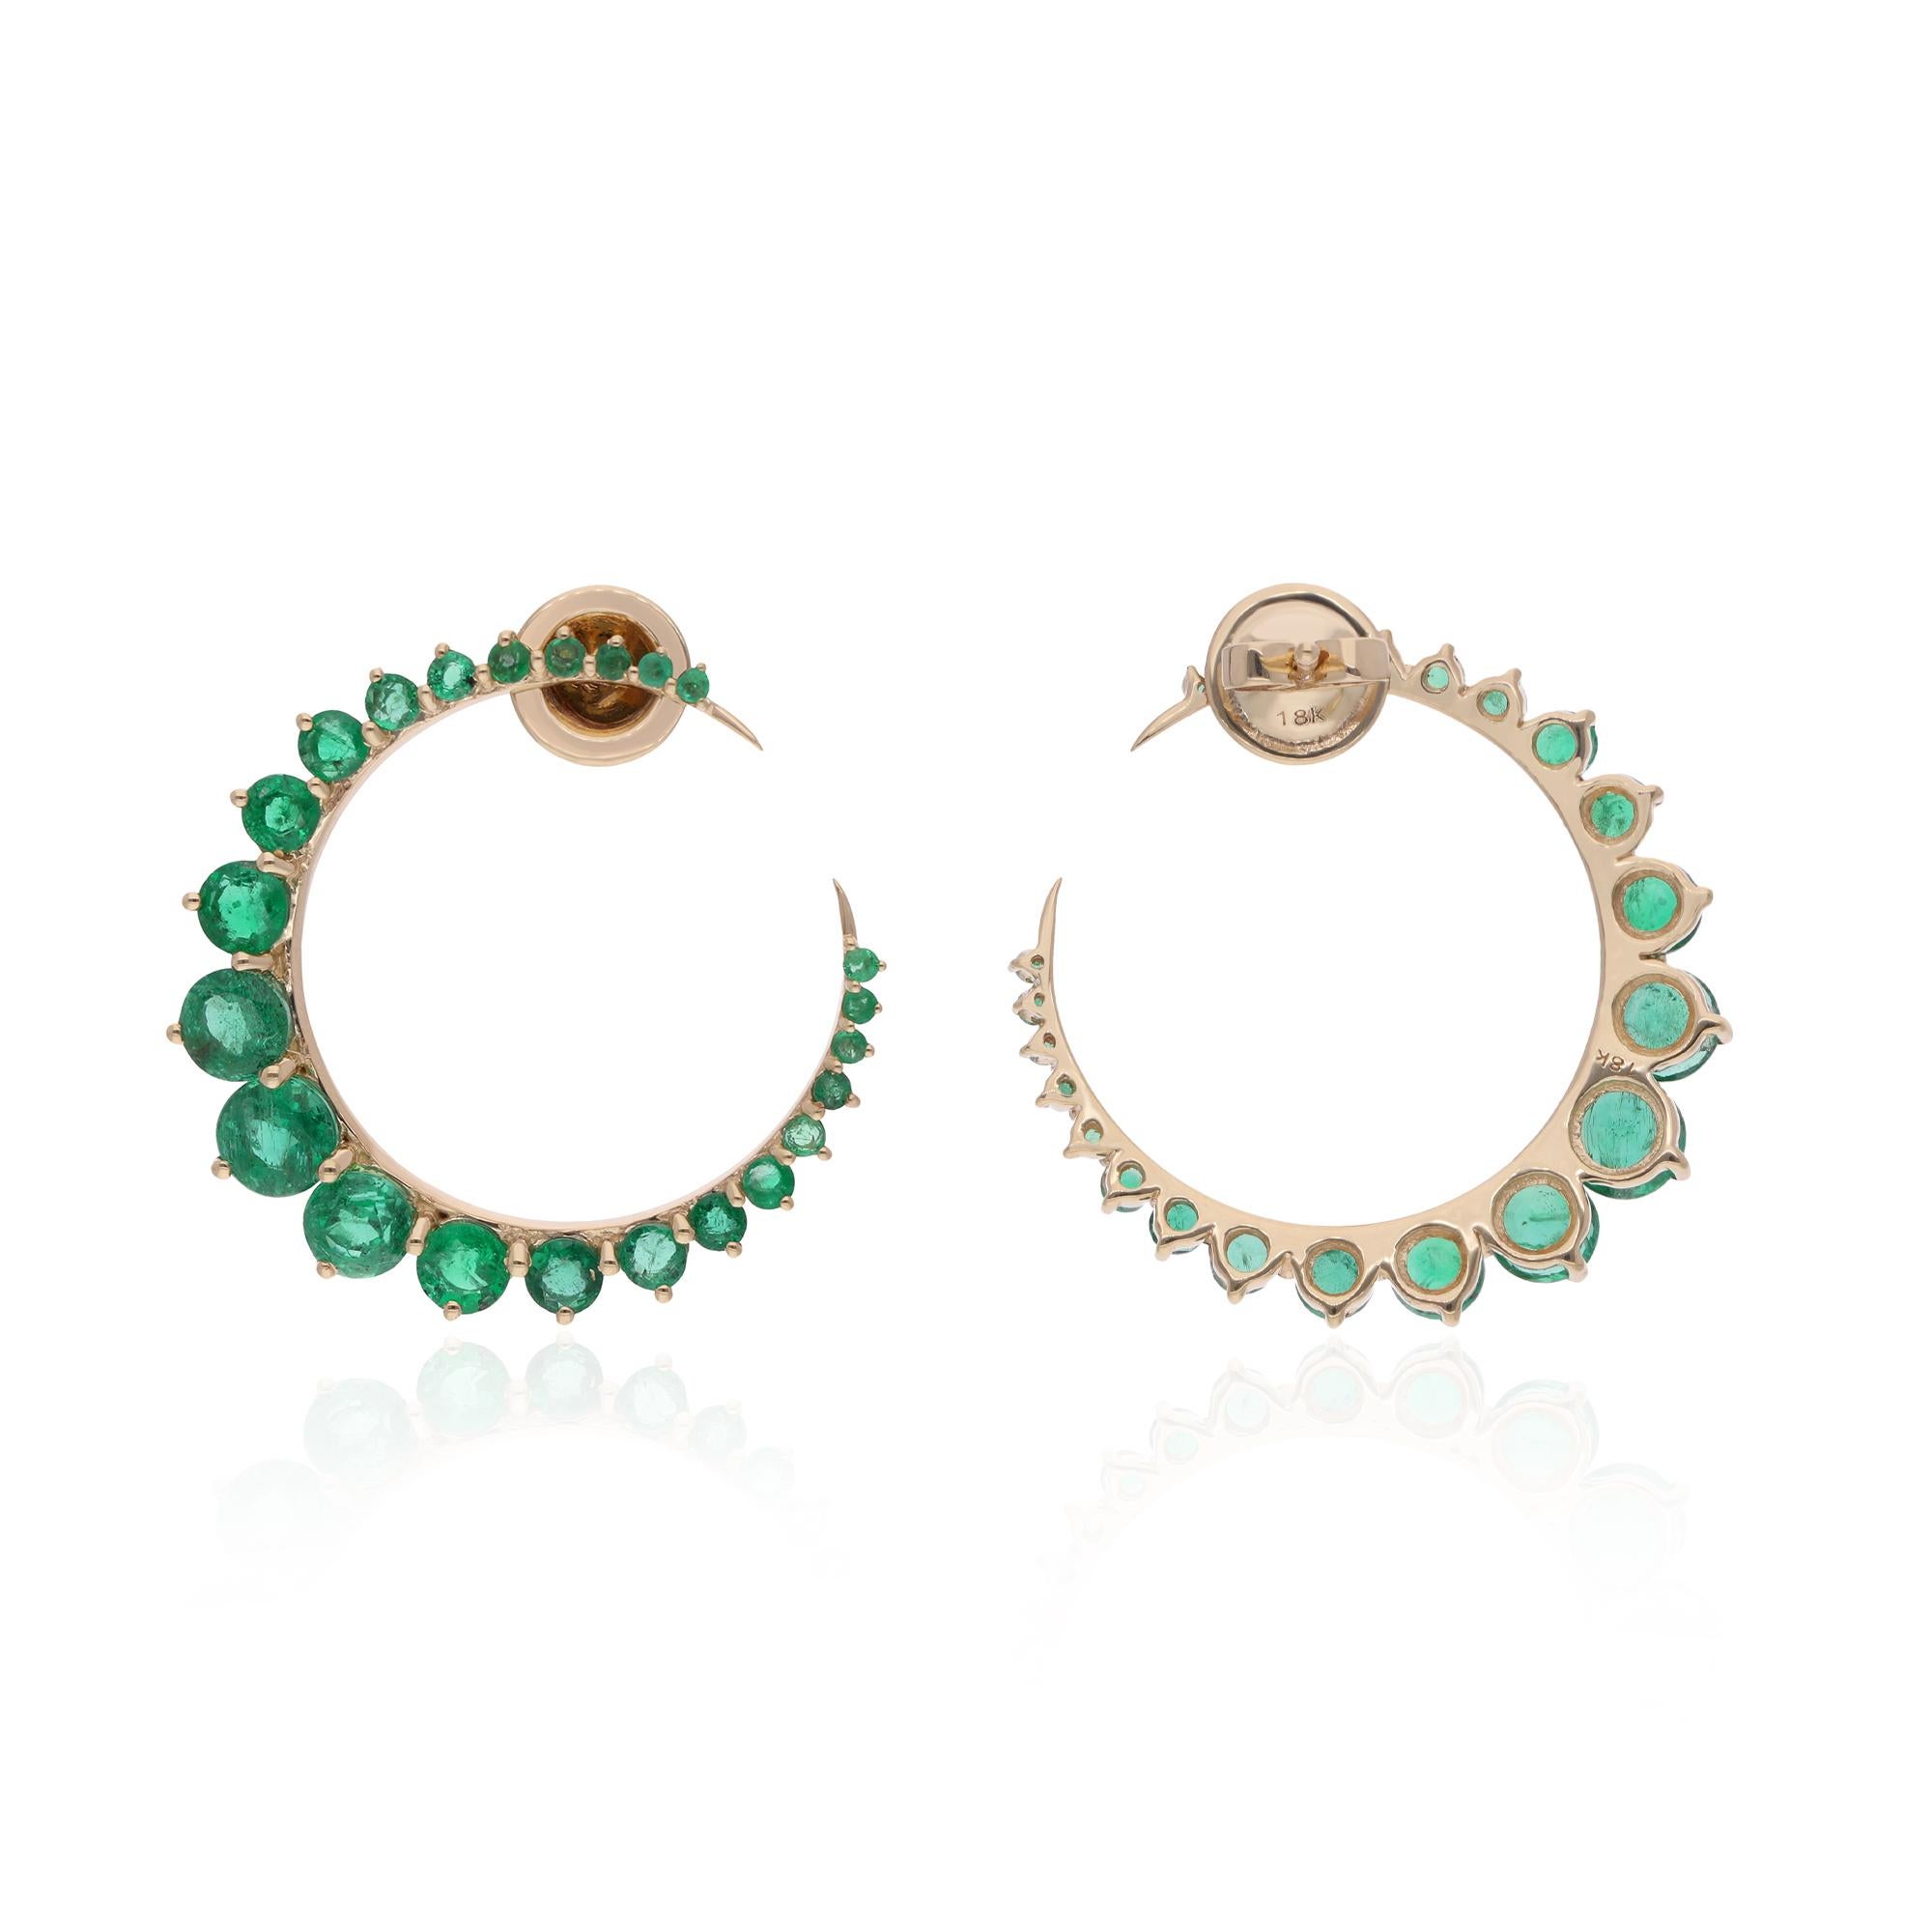 Each earring features a crescent moon design, intricately detailed and gracefully adorned with captivating Zambian Emerald gemstones. Known for their rich green hue and exceptional clarity, these emeralds are sourced from the renowned mines of